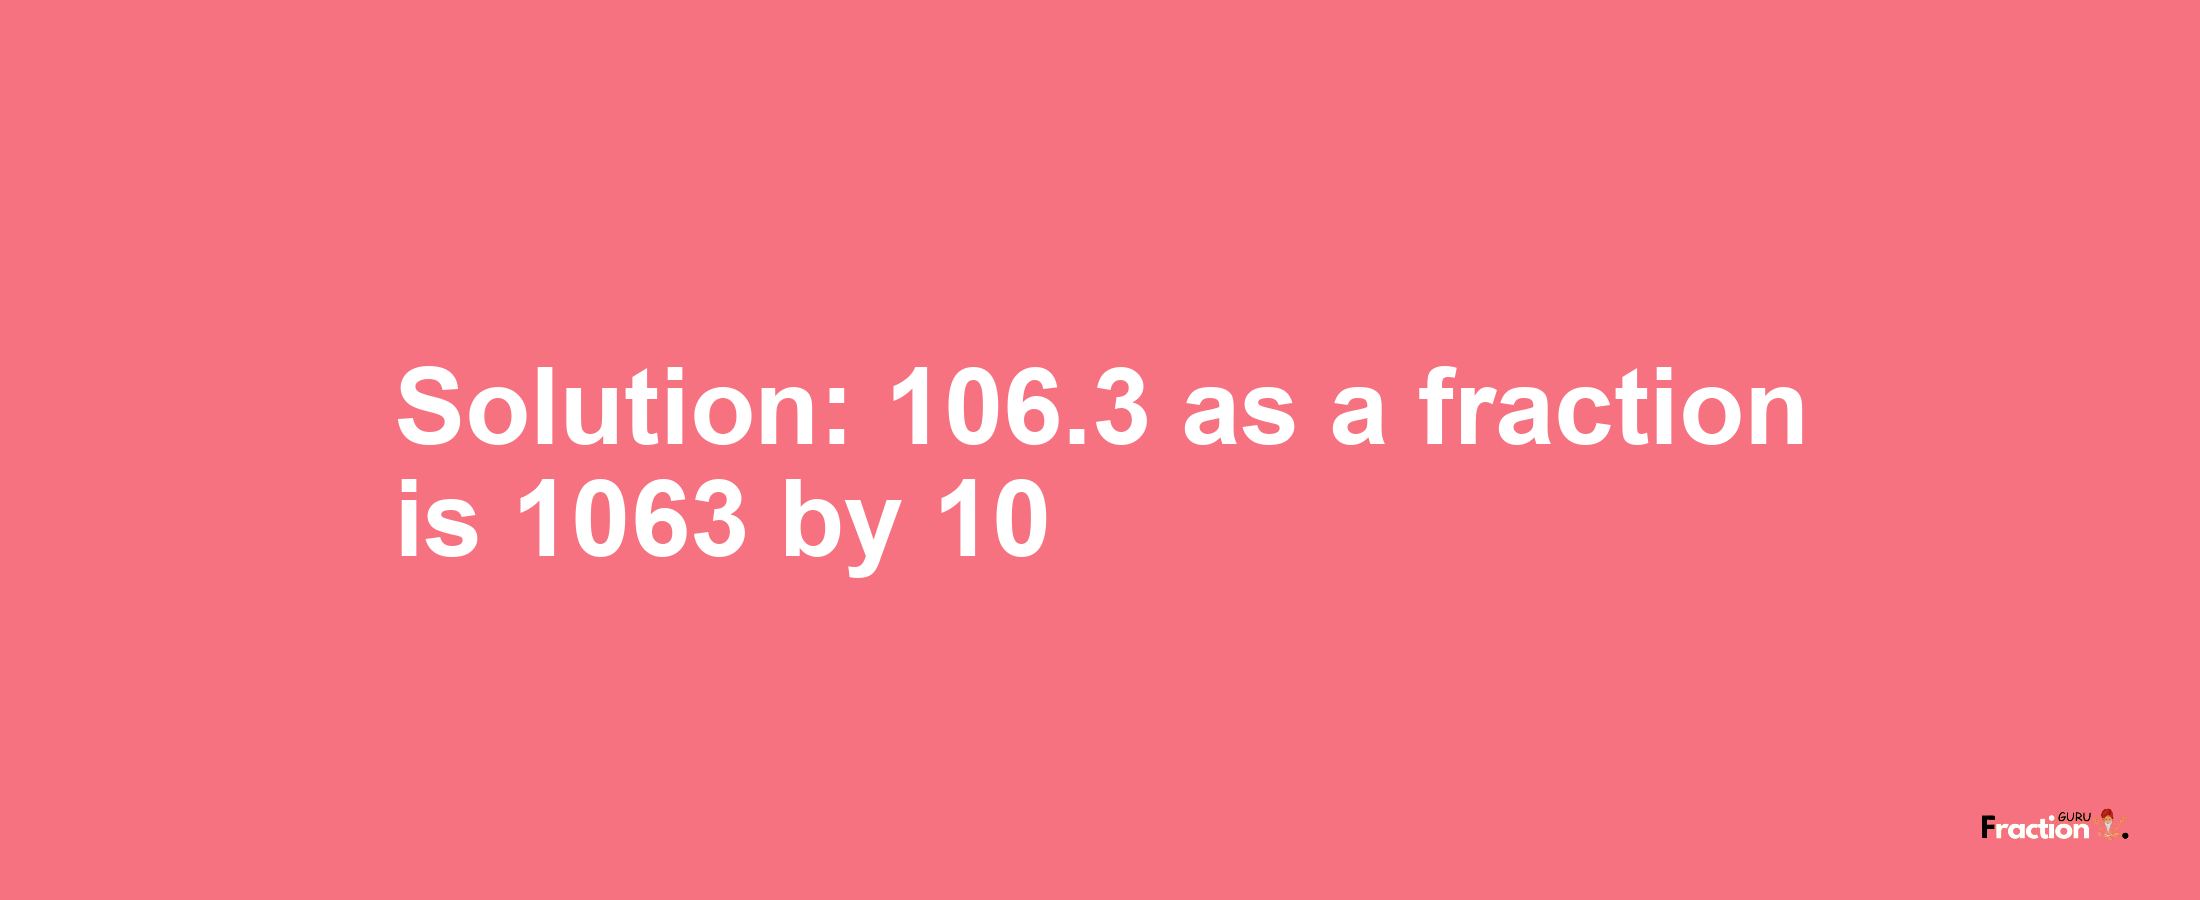 Solution:106.3 as a fraction is 1063/10